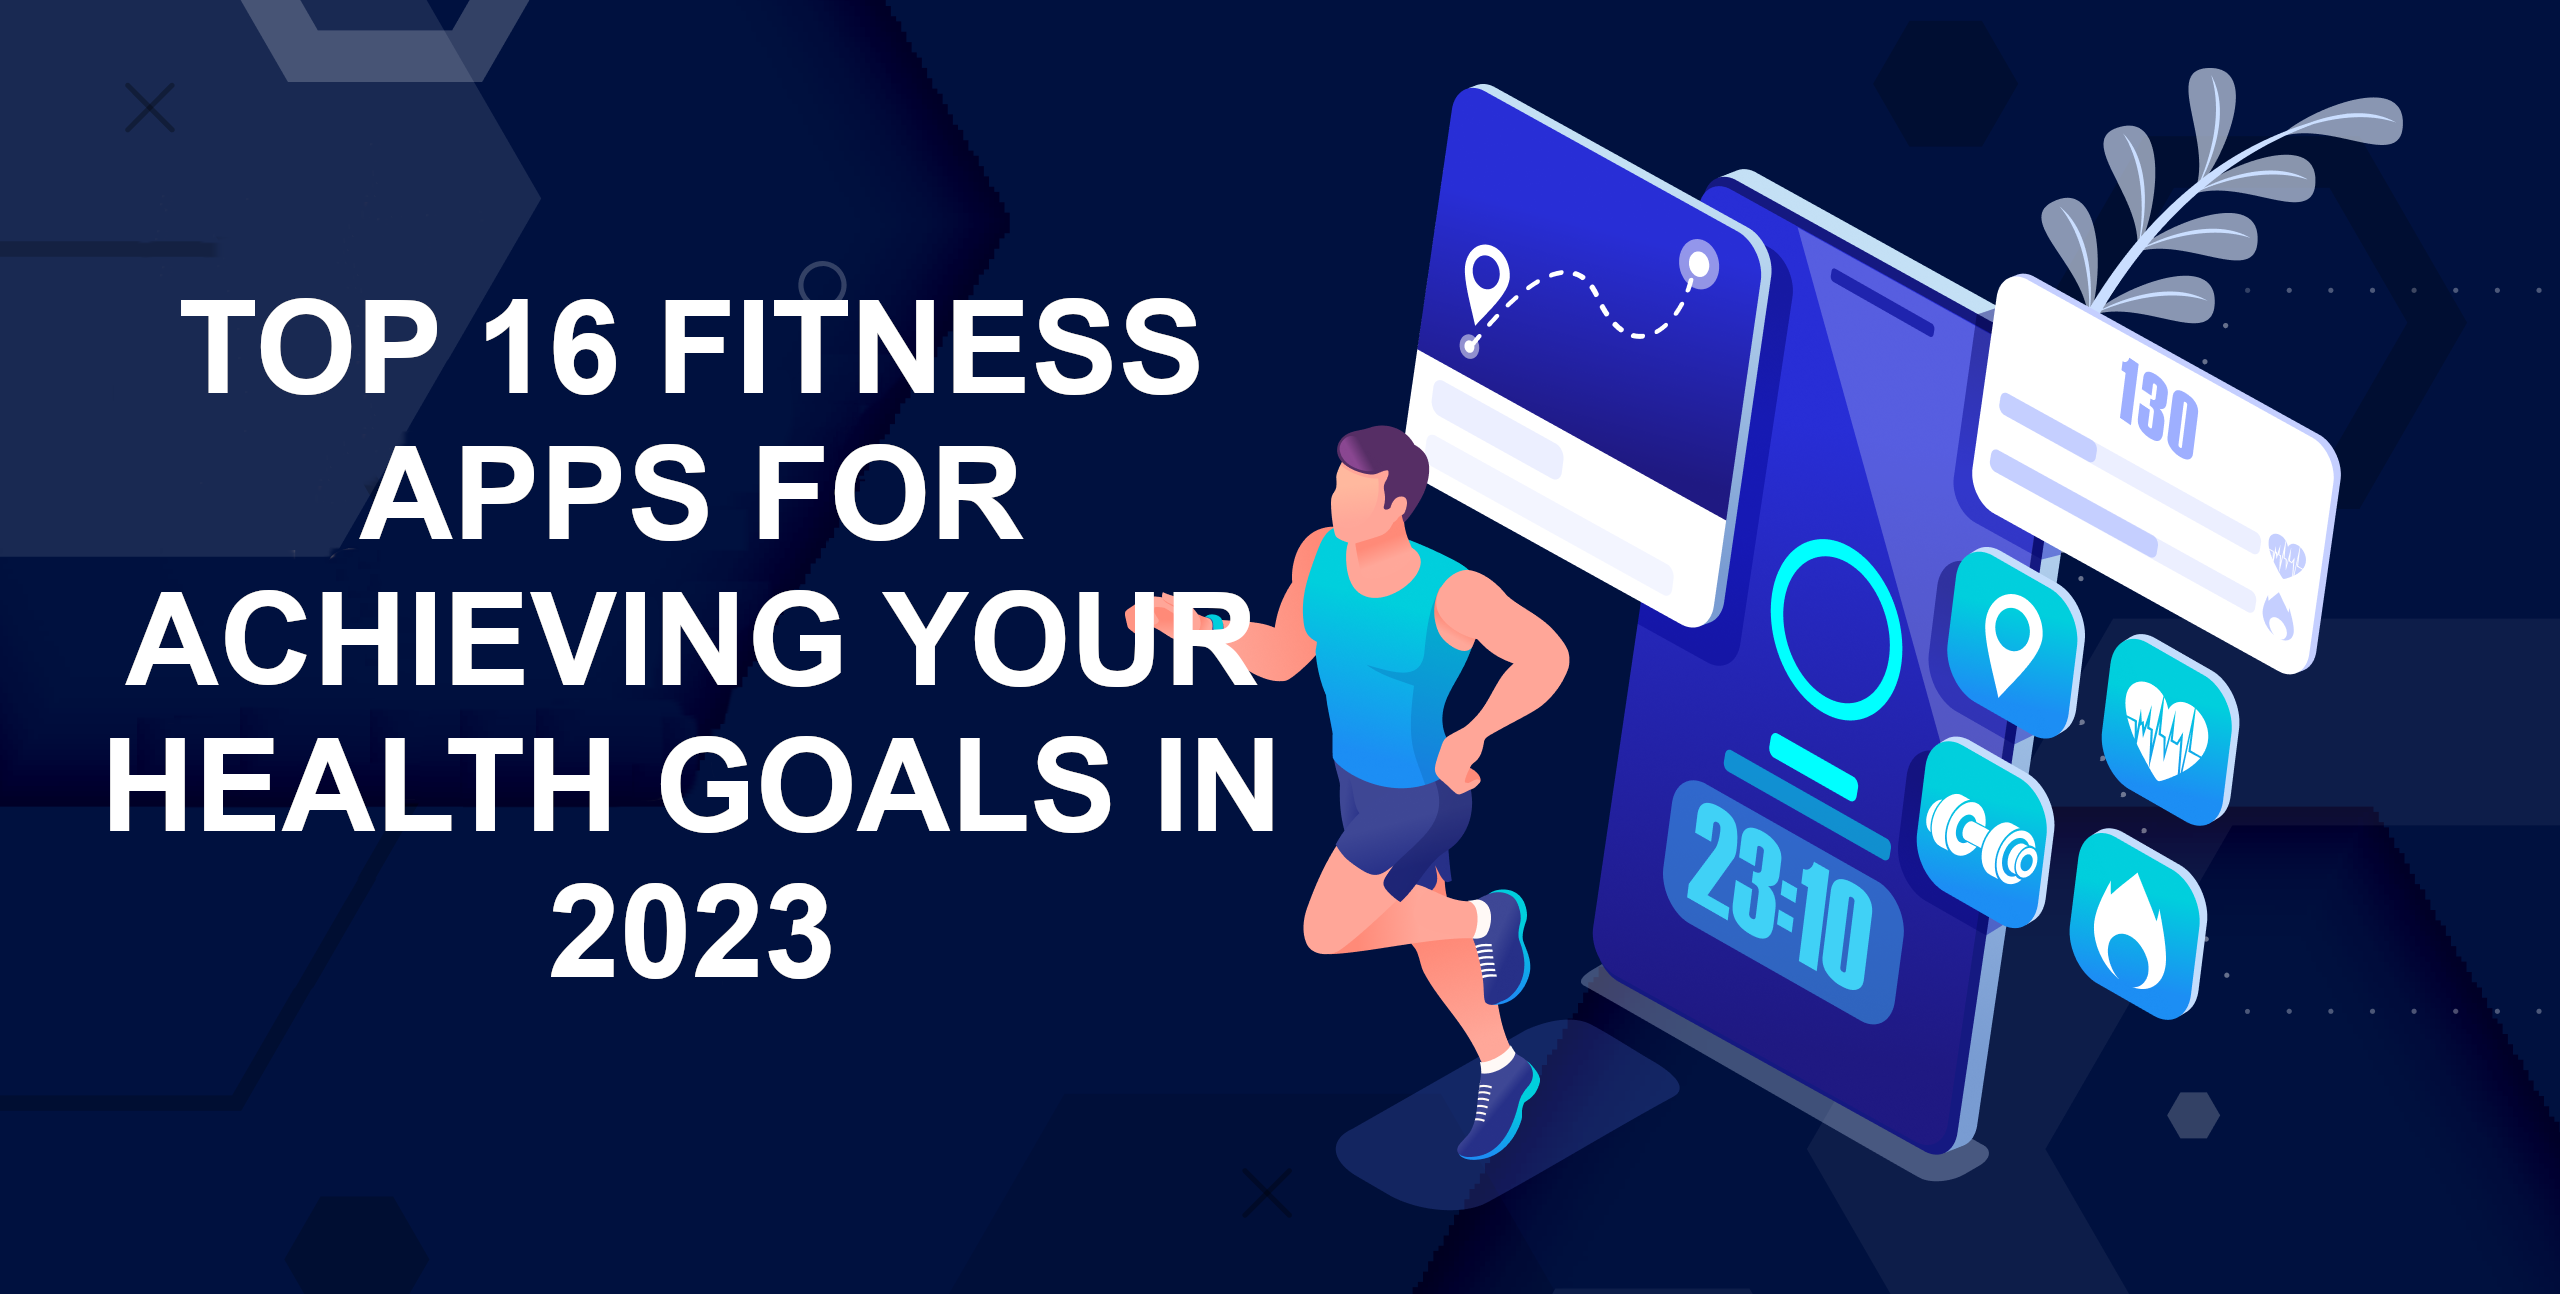 Top 16 Fitness Apps for Achieving Your Health Goals in 2023